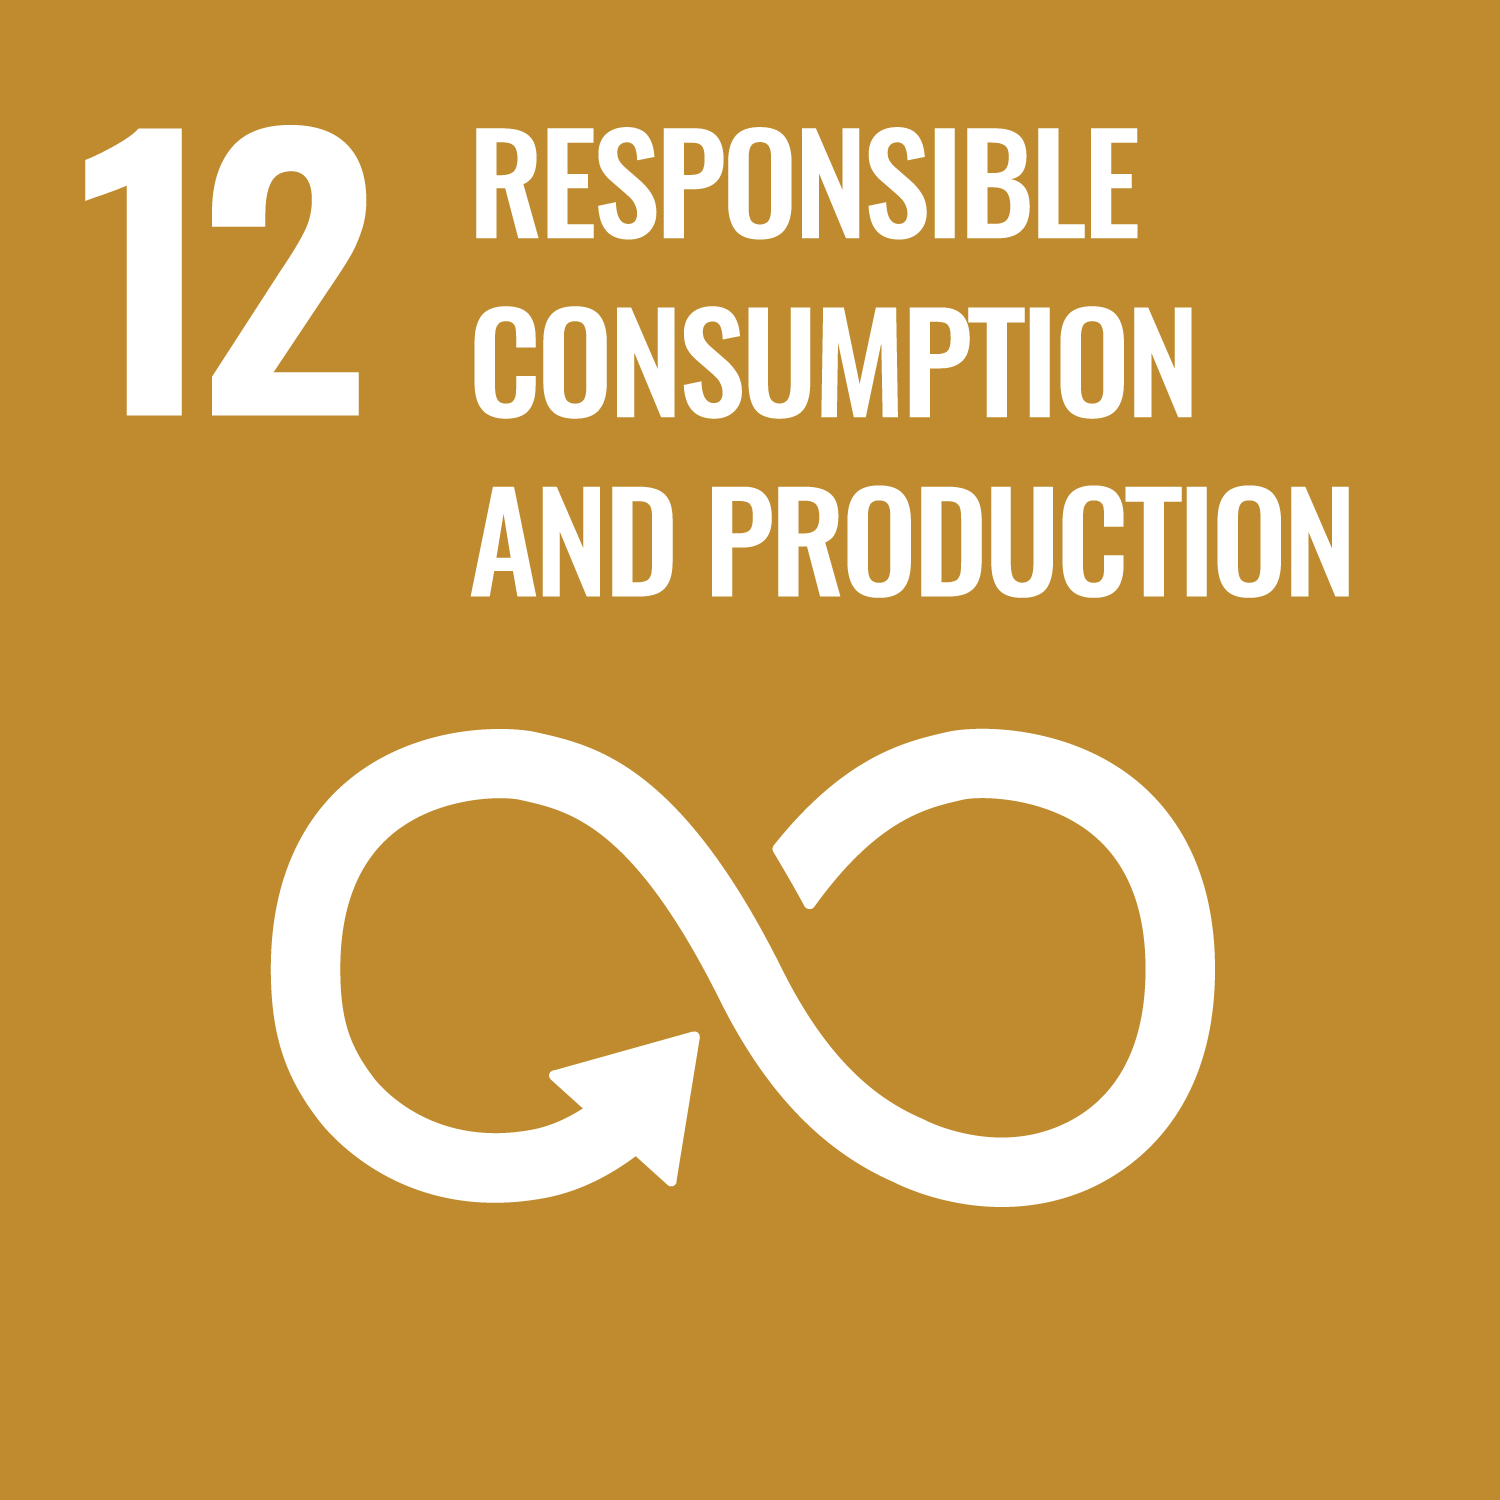 Logo with the number 12 and the words responsible consumption and production, with an image of a arrow in the shape of a sideways figure 8 below.